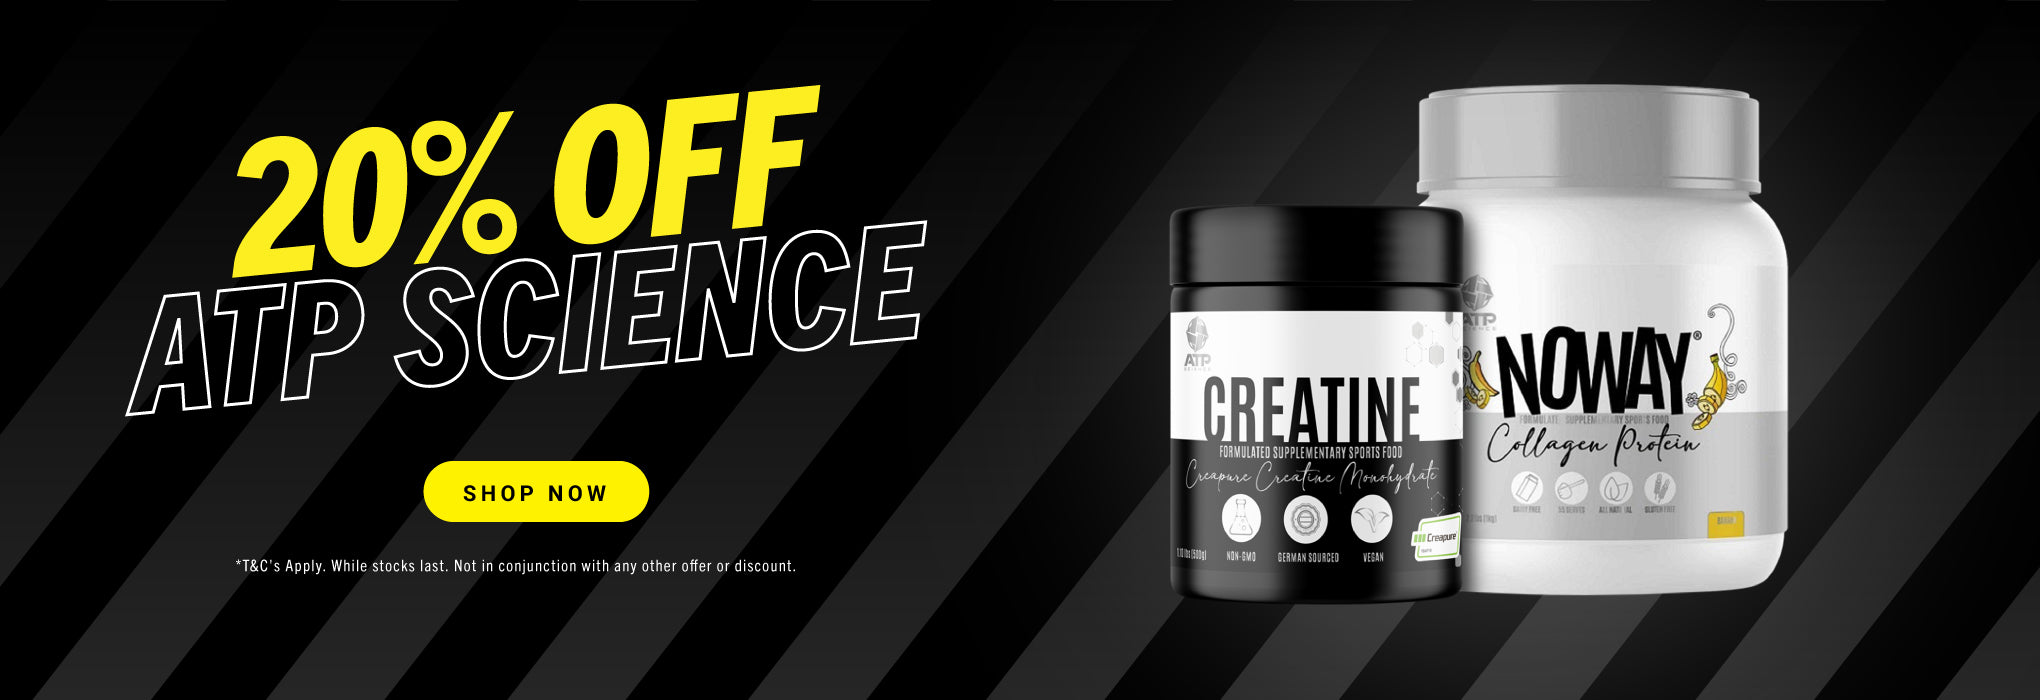 March ATP Science Deal - 20% OFF RANGE